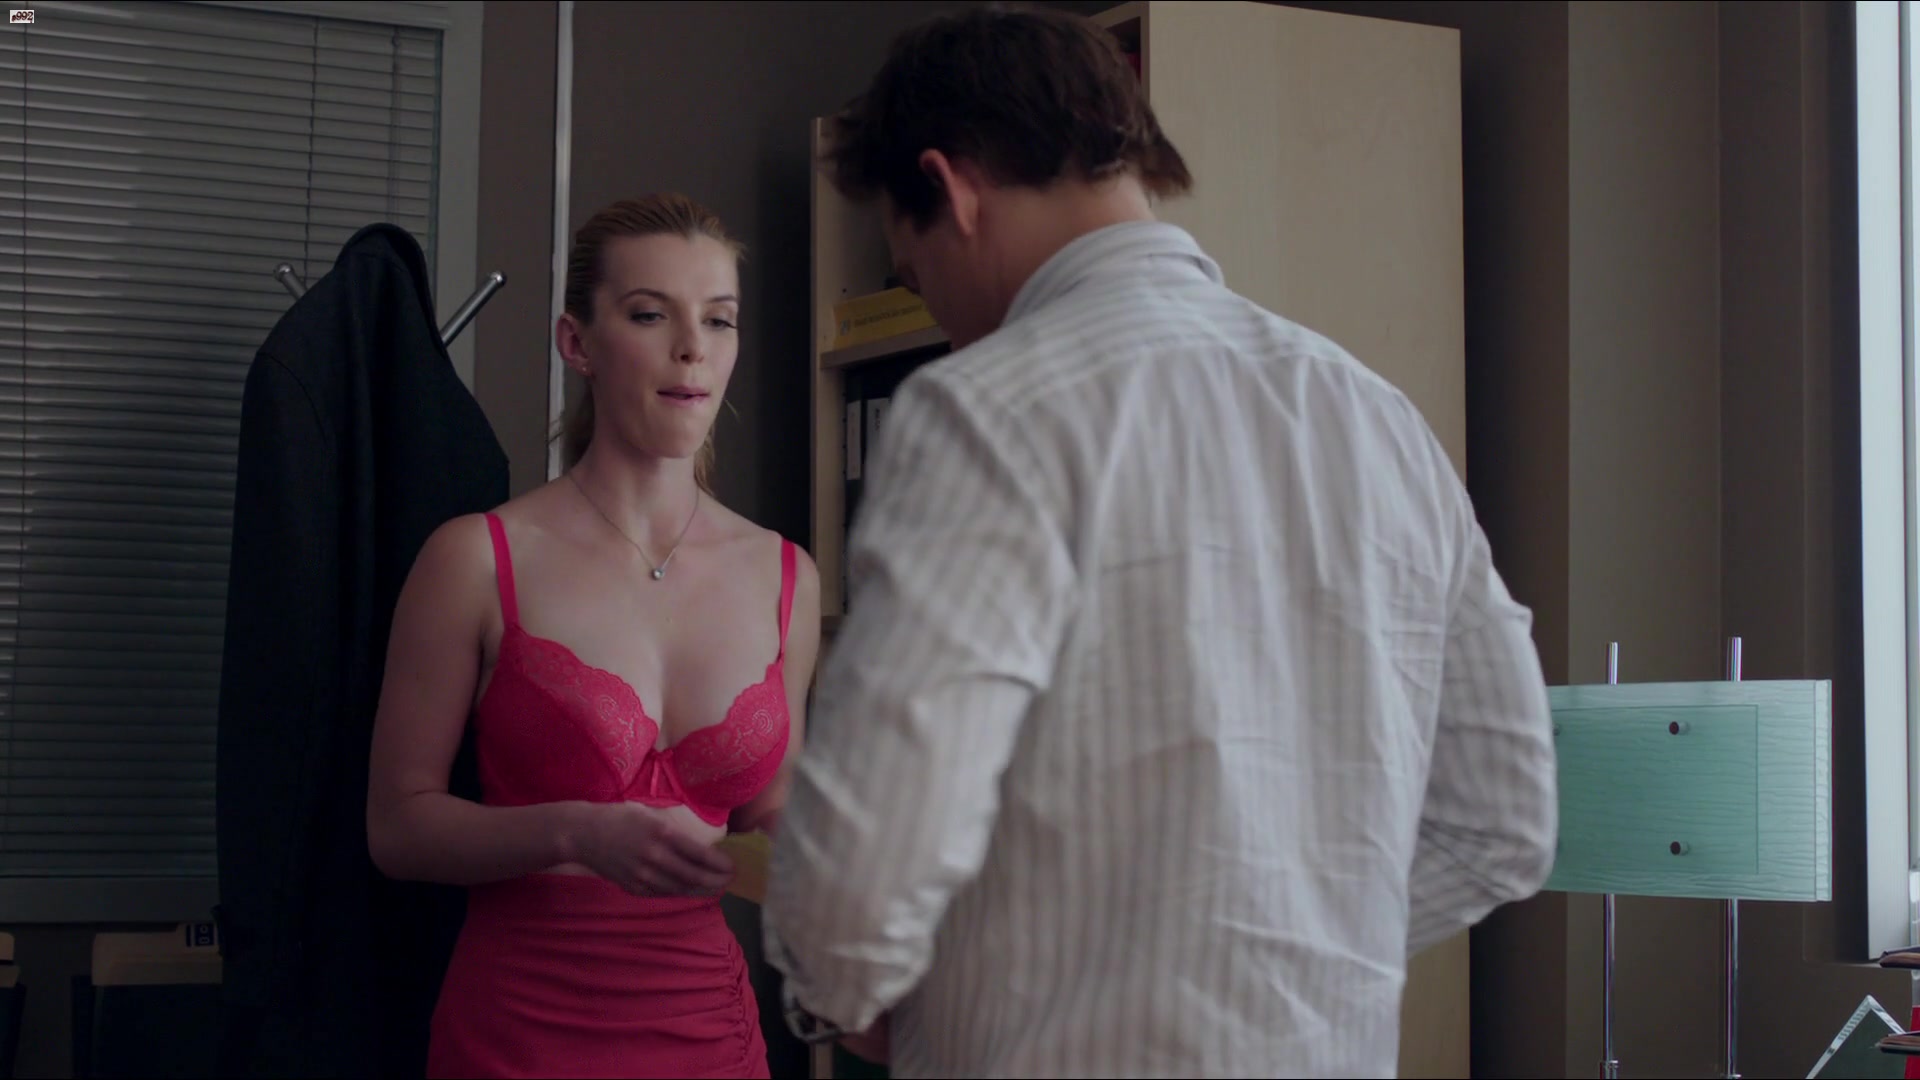 Betty gilpin topless